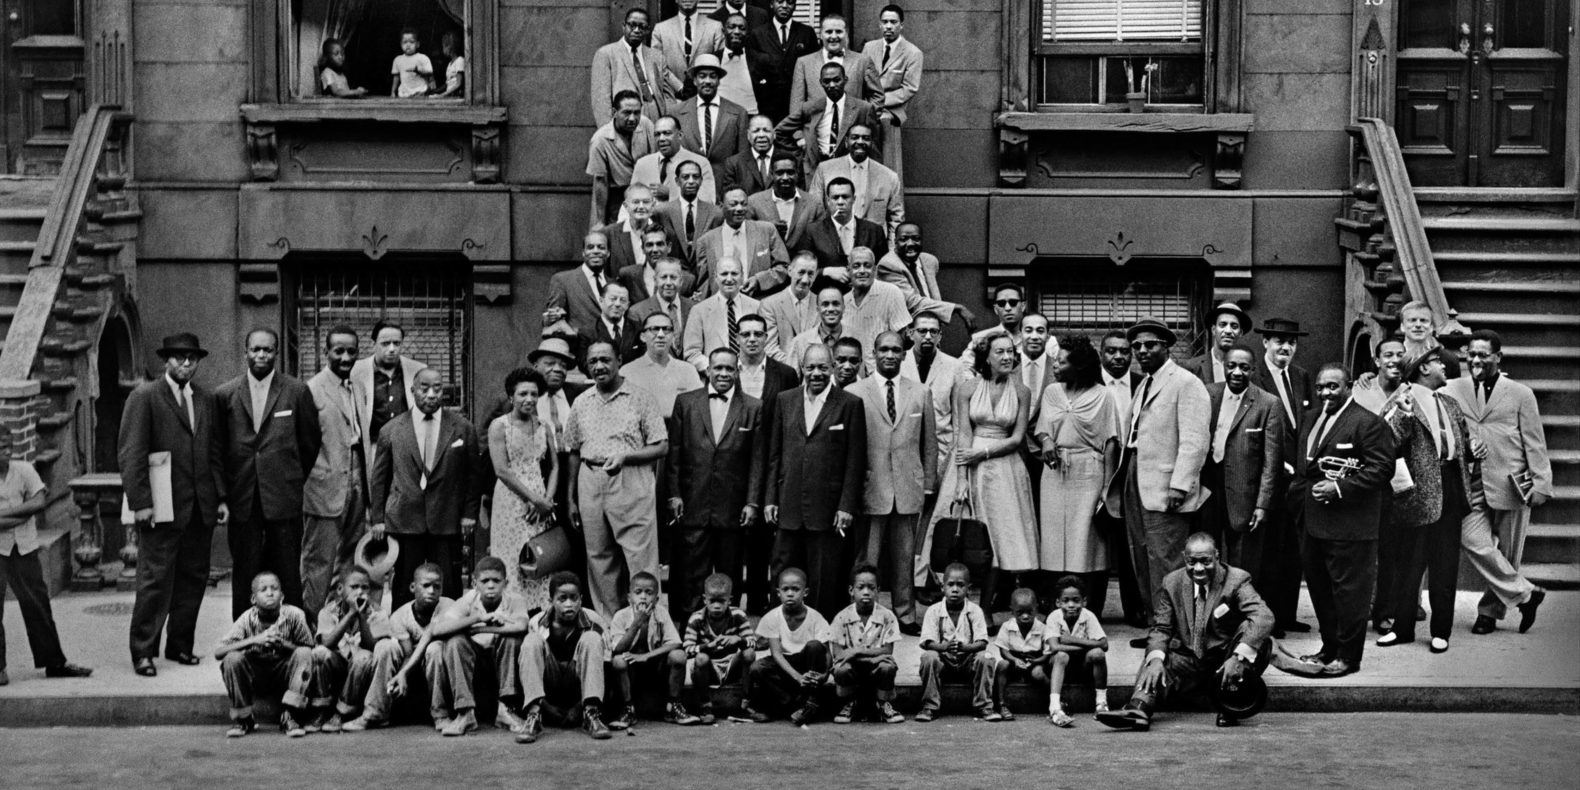 Deep Water exhibition on view at MASS MoCA, feature image. Art Kane, A Great Day in Harlem, 1958.